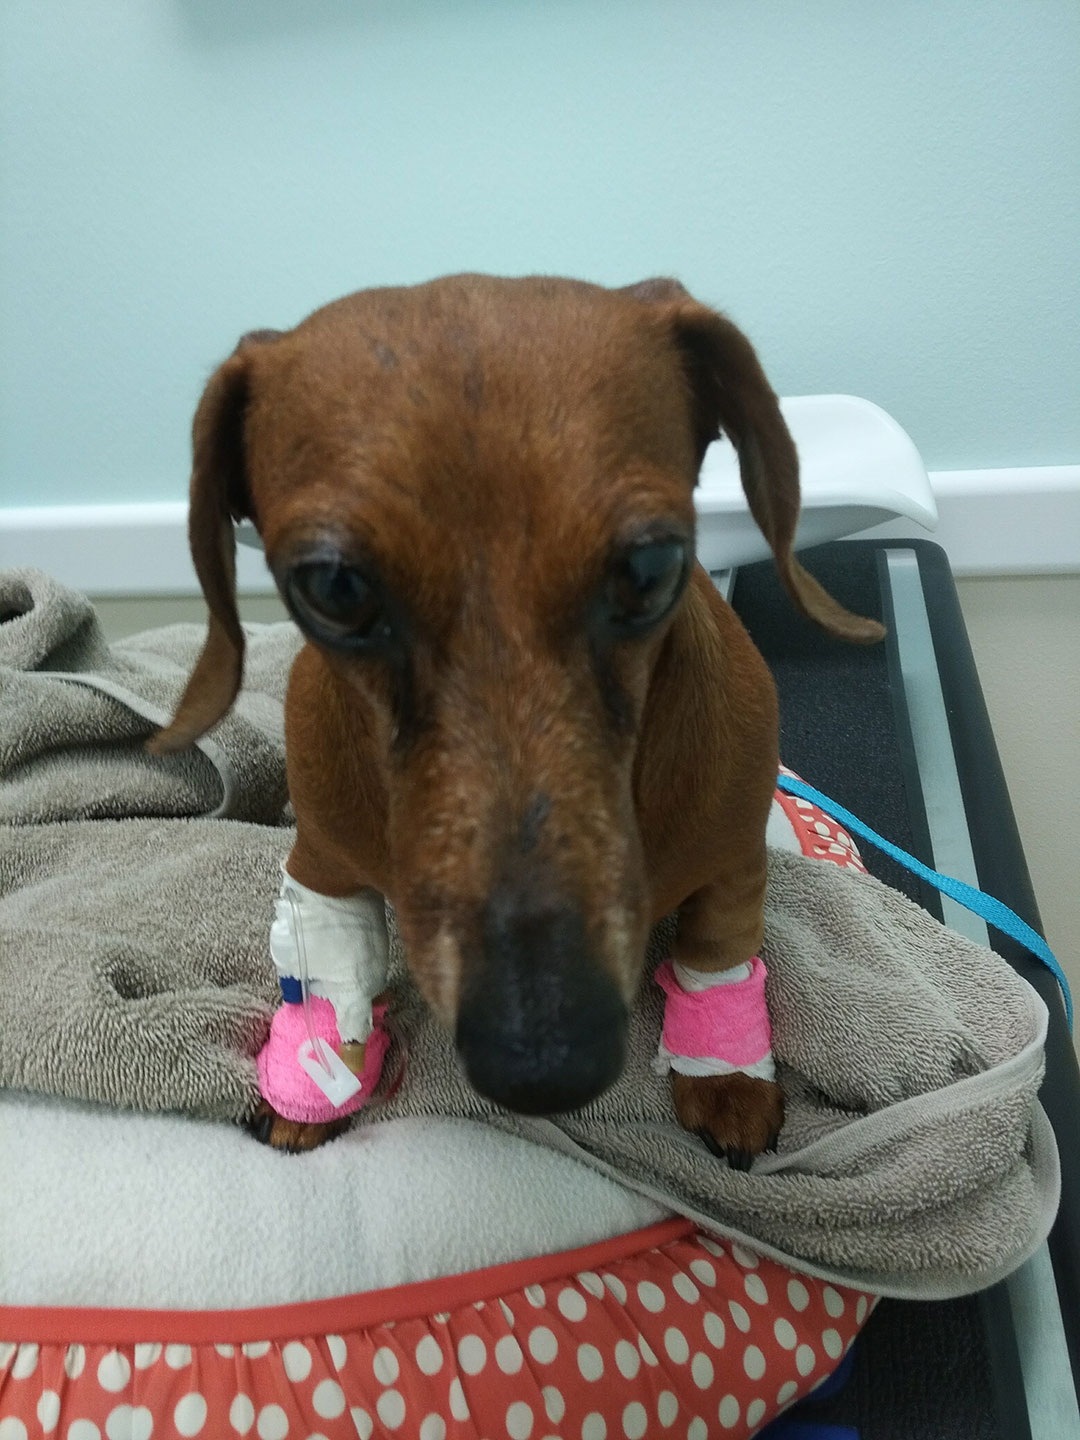 Mini Dachshund viewed from the front in a veterinarian's office, with pink bandages on her front legs